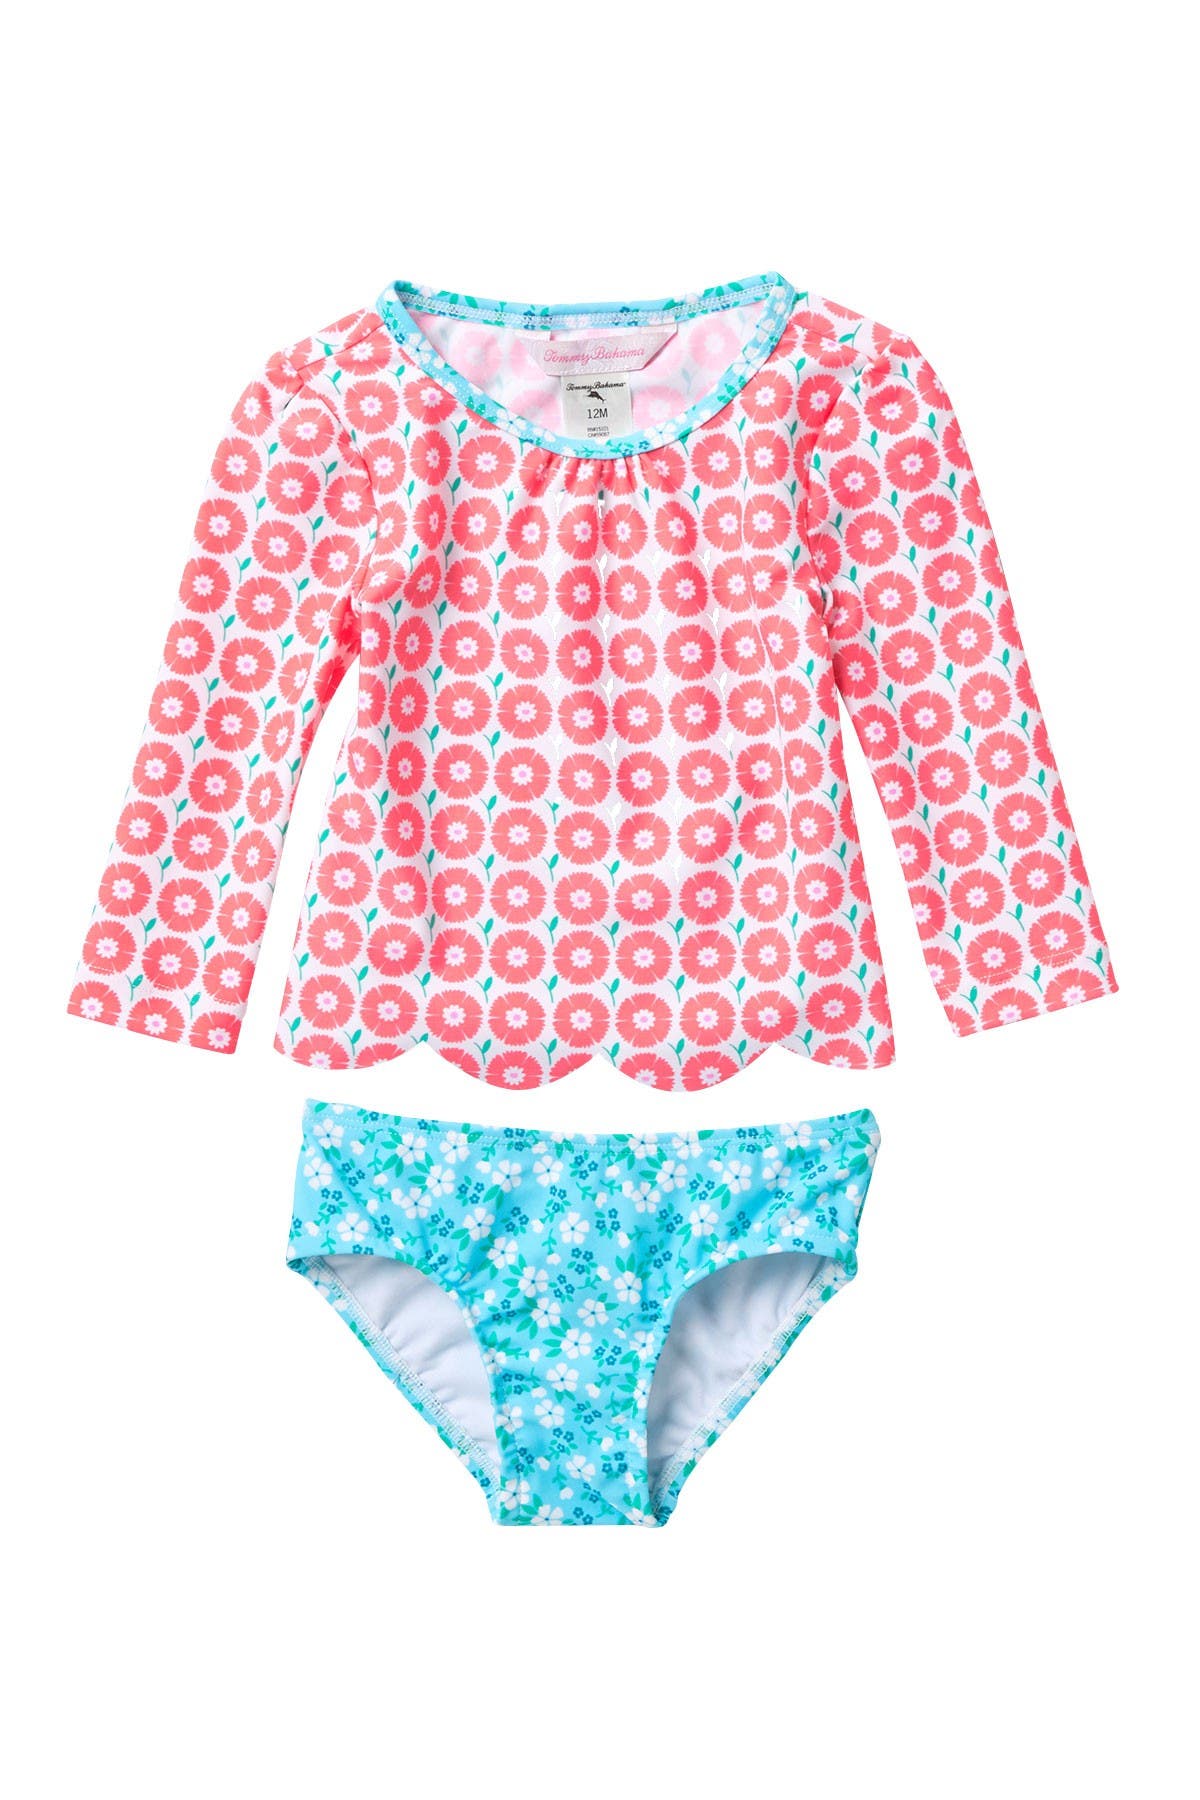 tommy bahama baby girl clothes